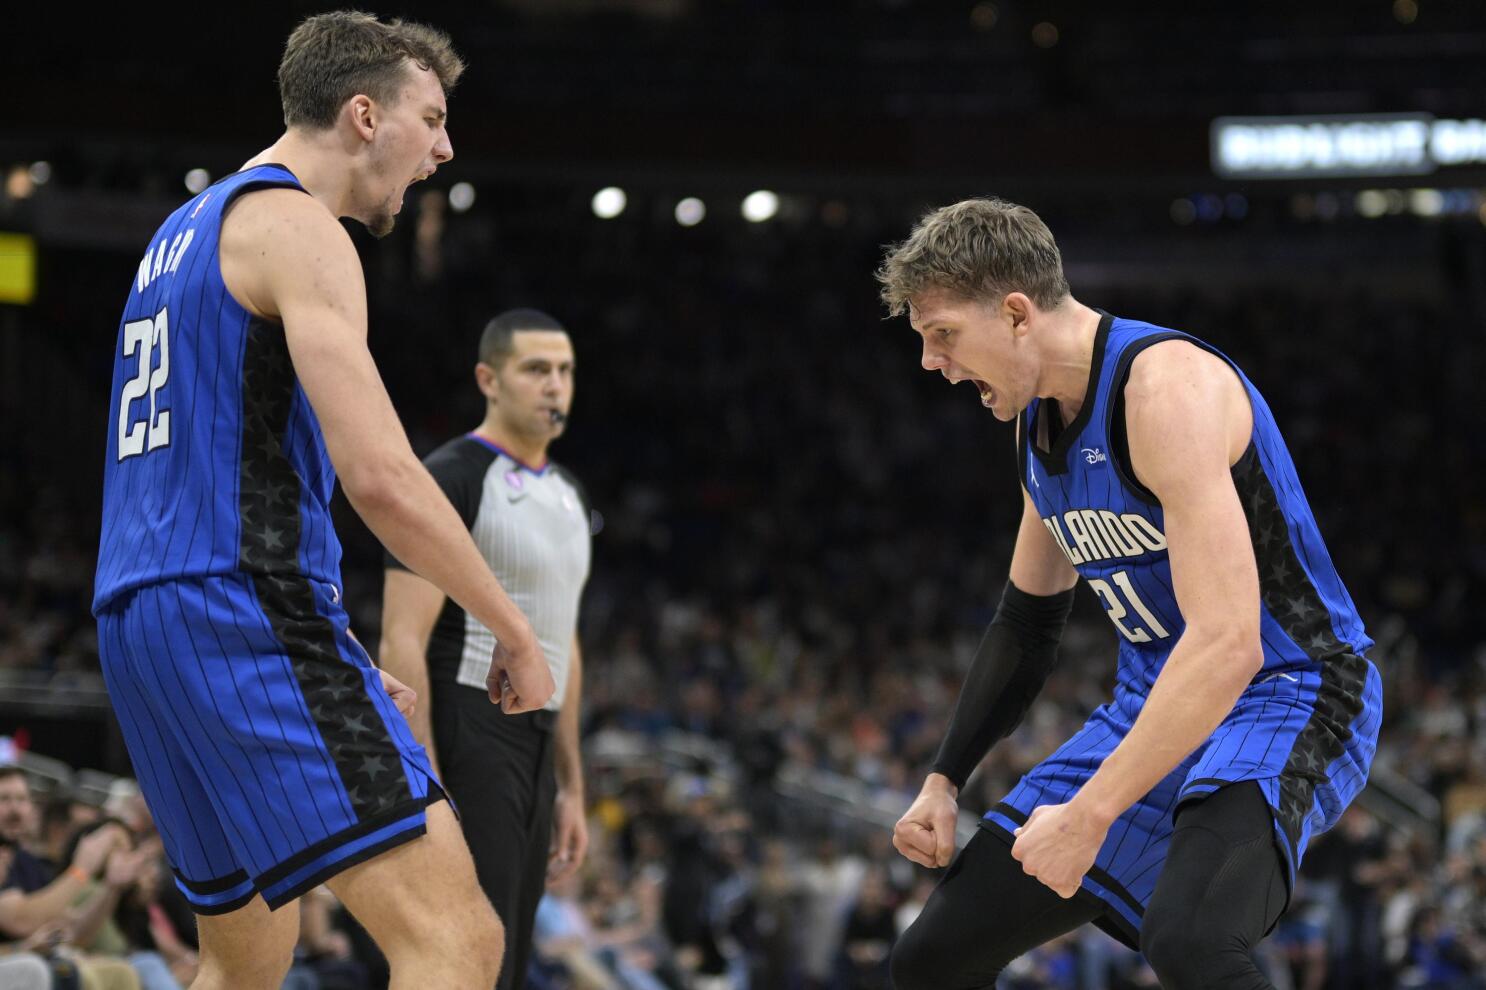 Wagner gets go-ahead layup in Magic's 110-108 win over Mavs